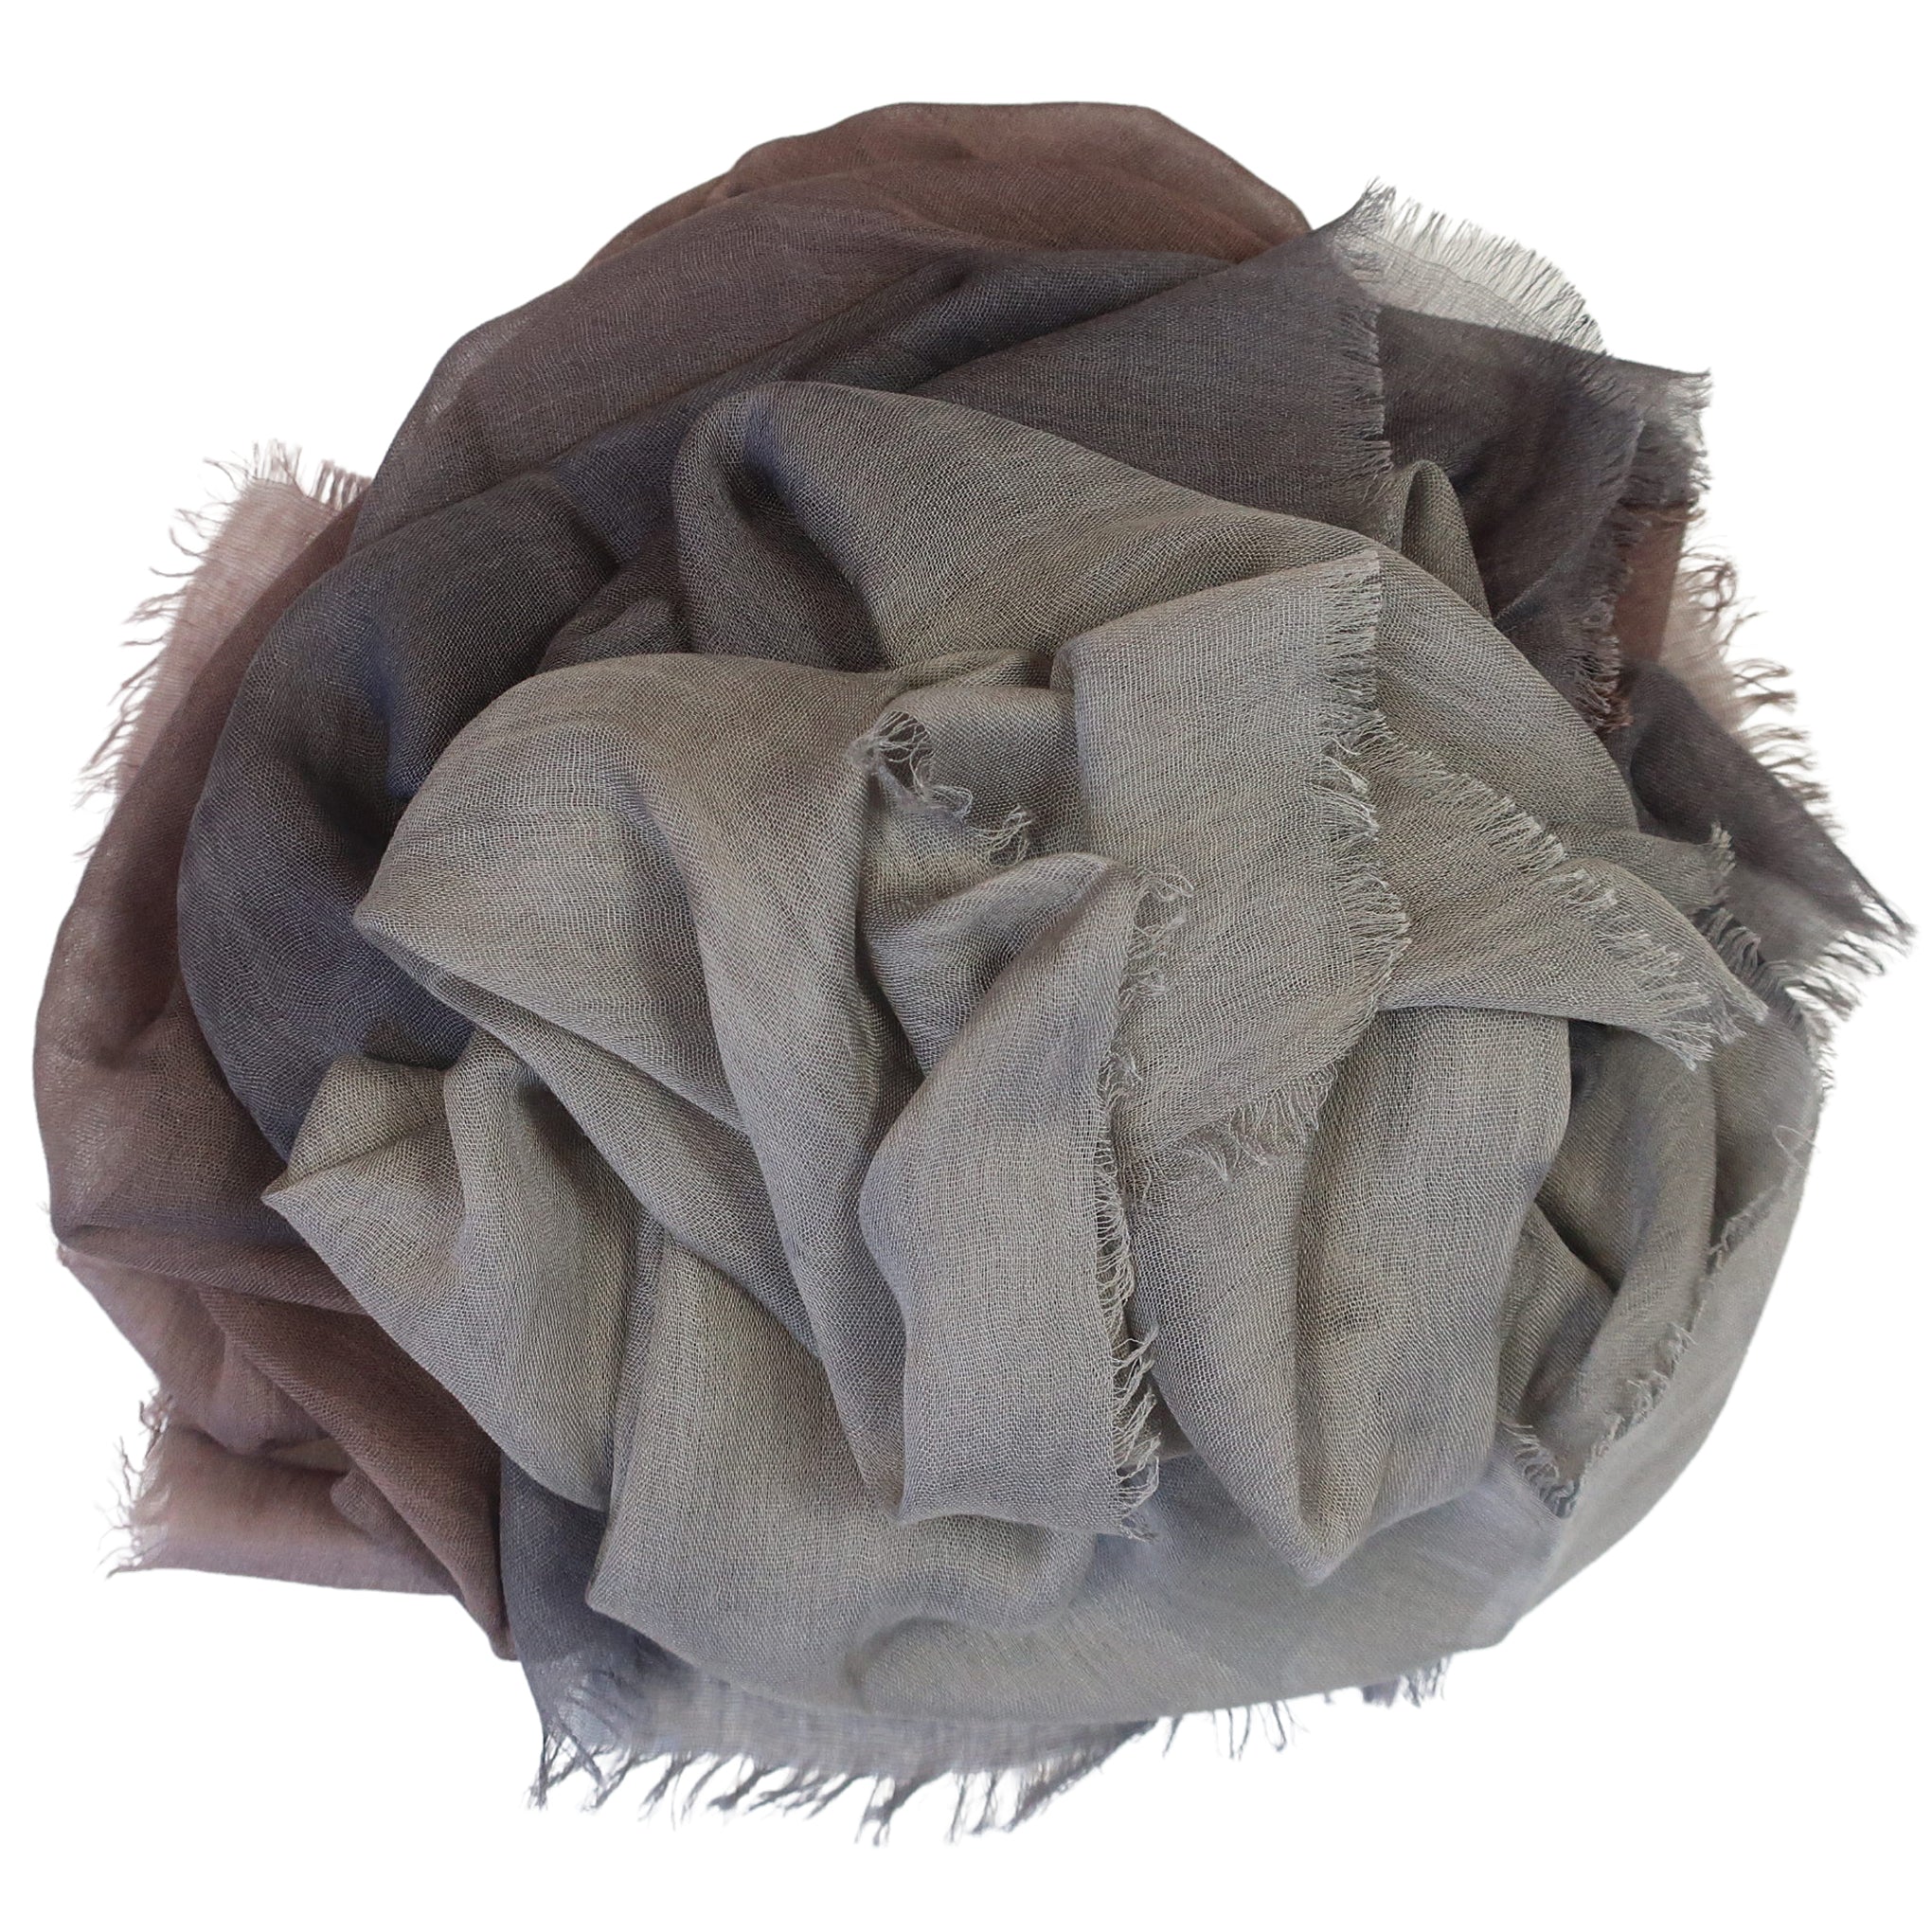 Blue Pacific Dream Cashmere and Silk Scarf in Desert Taupe 47 x 37